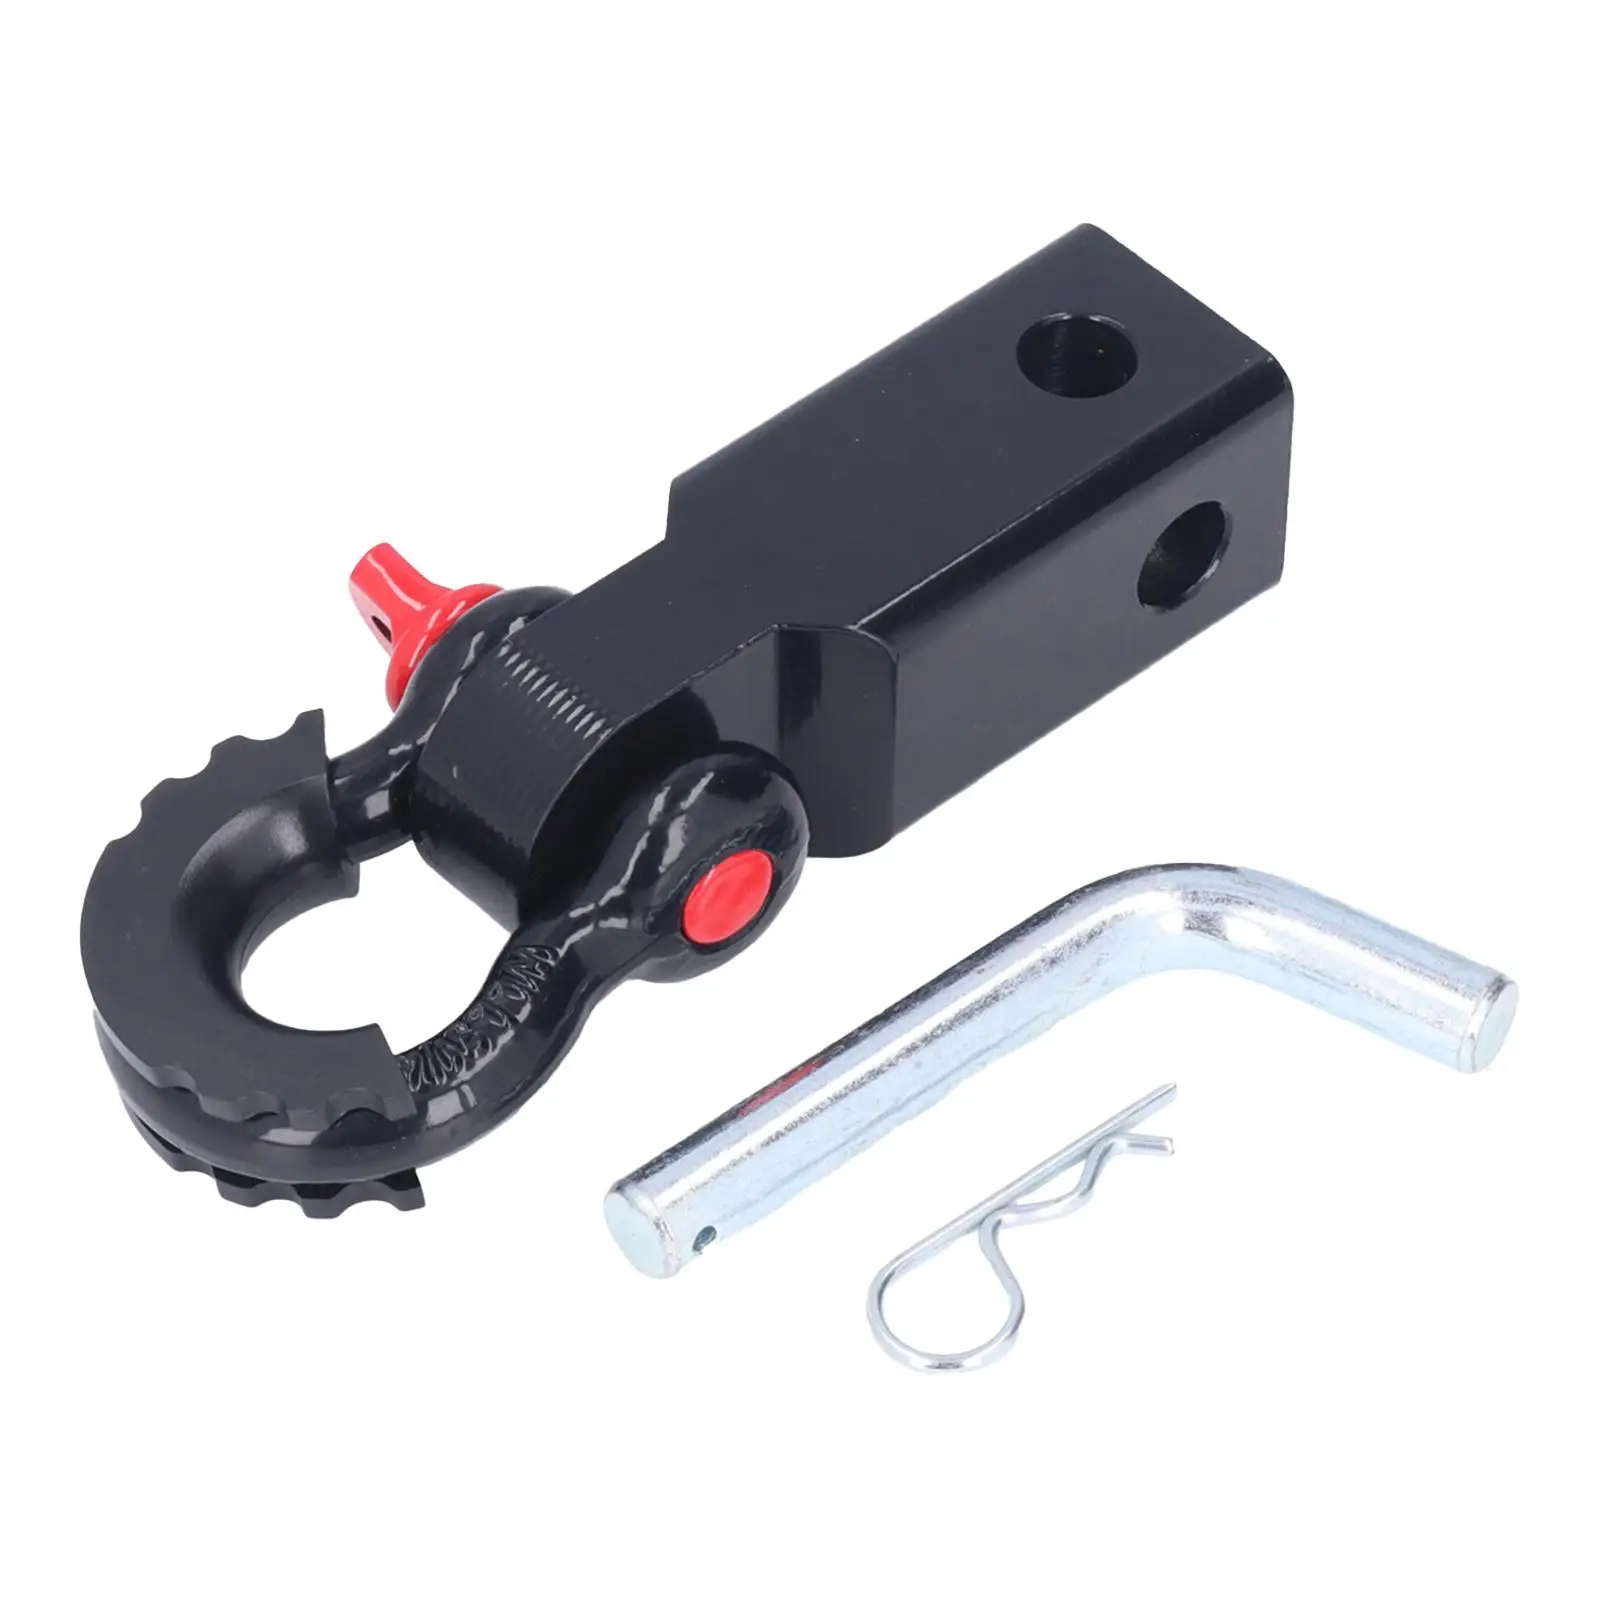 Shackle Hitch Receiver Spare Easy Using Heavy Duty Block Professional Attachments with Hitch Pin Connector for SUV Vehicle